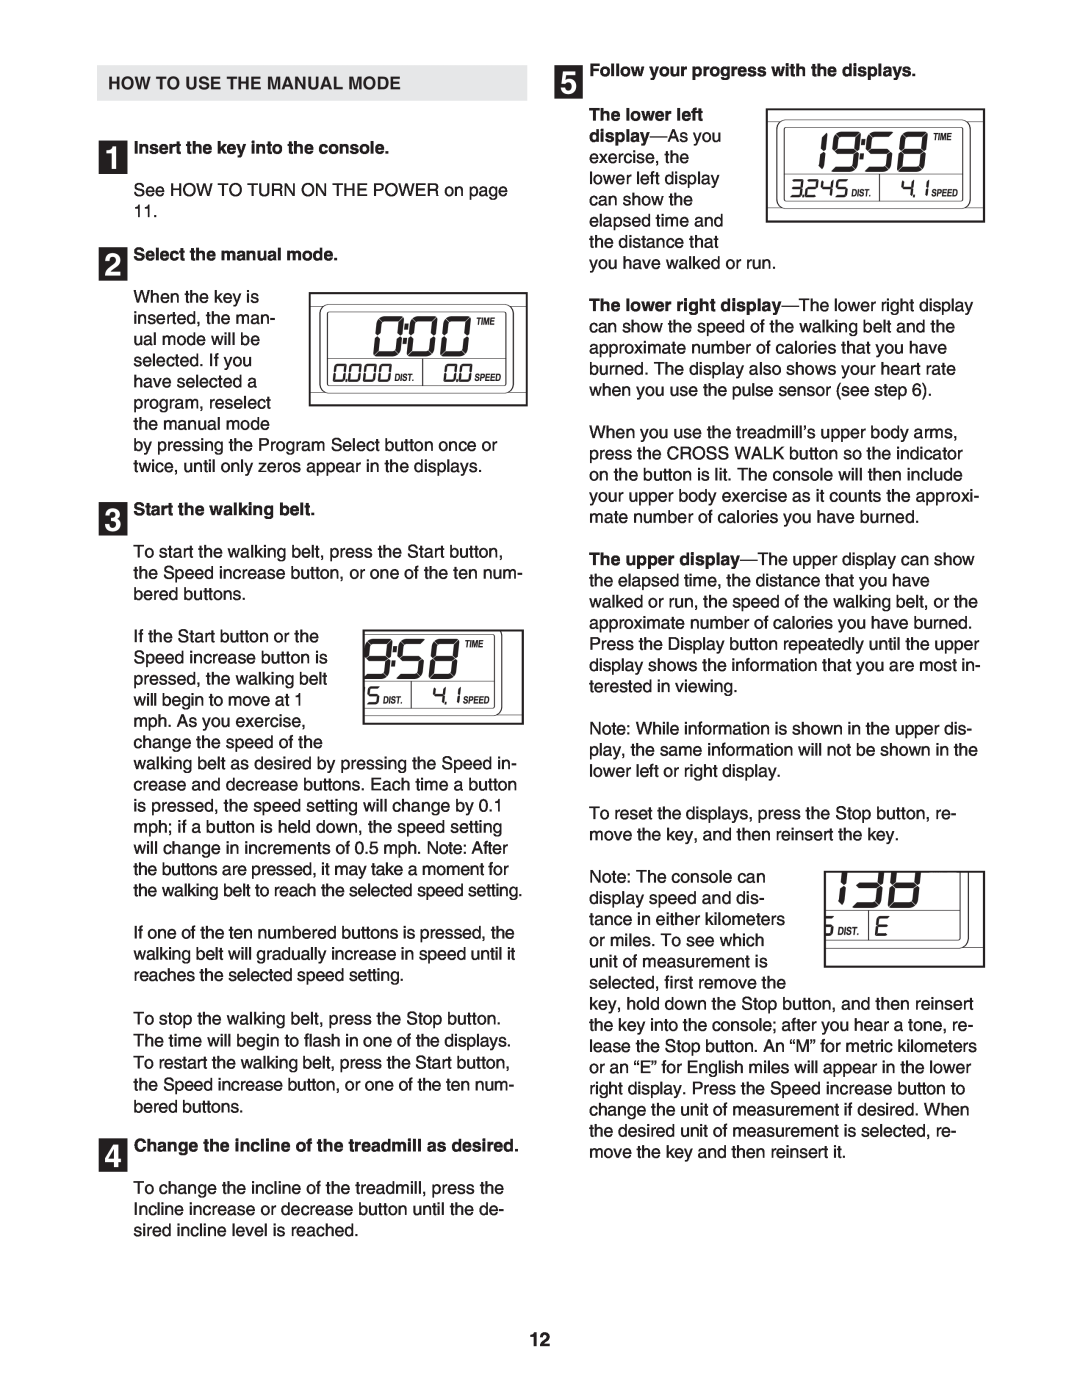 ProForm PMTL32706.0 user manual HOW TO USE THE MANUAL MODE 1 Insert the key into the console, Select the manual mode 